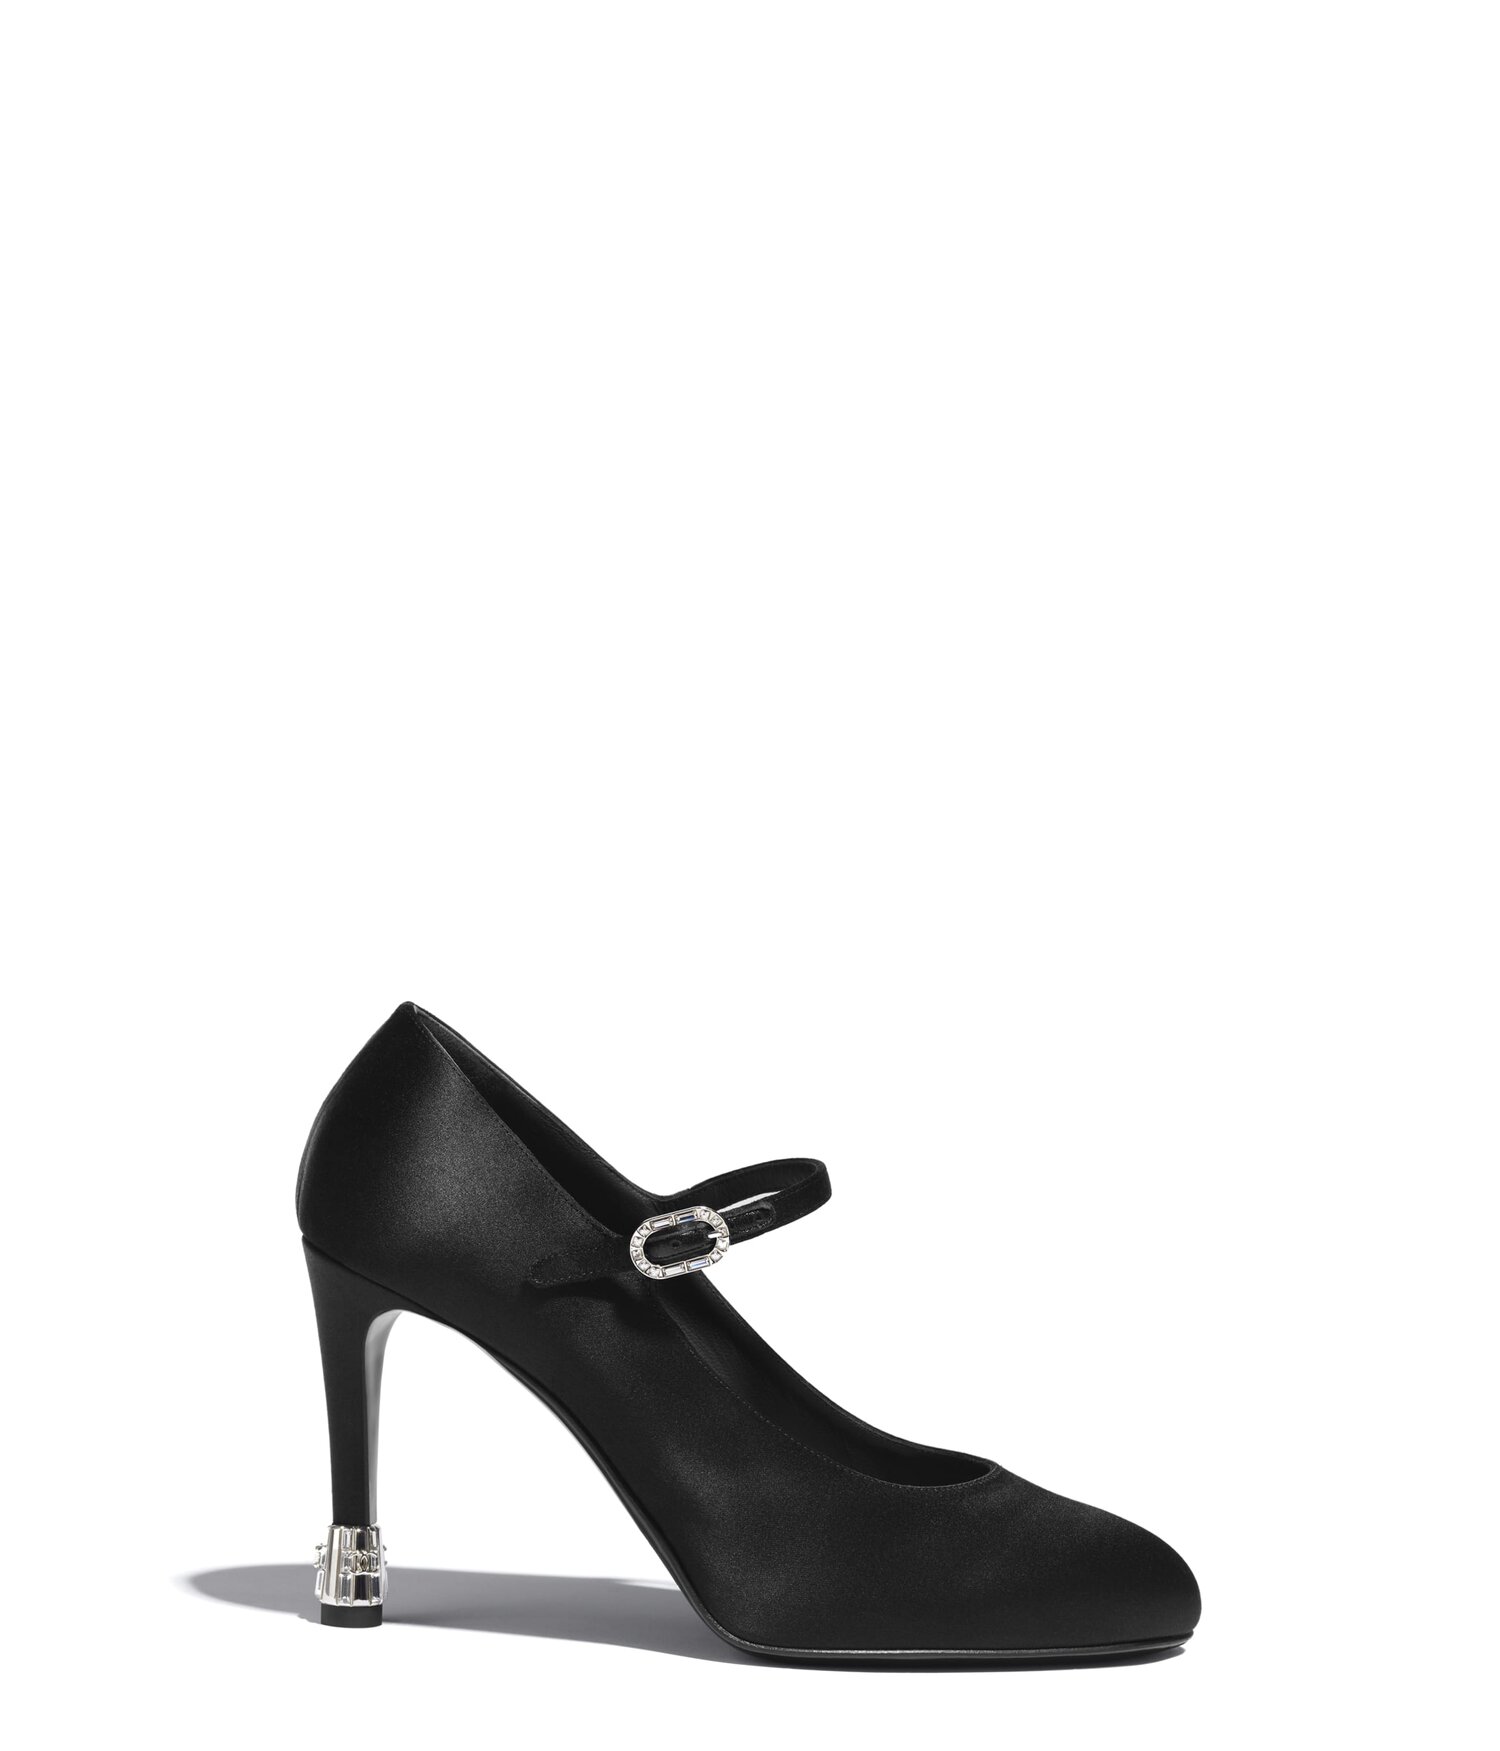 Chanel Satin Mary-Jane Pumps in Black — UFO No More